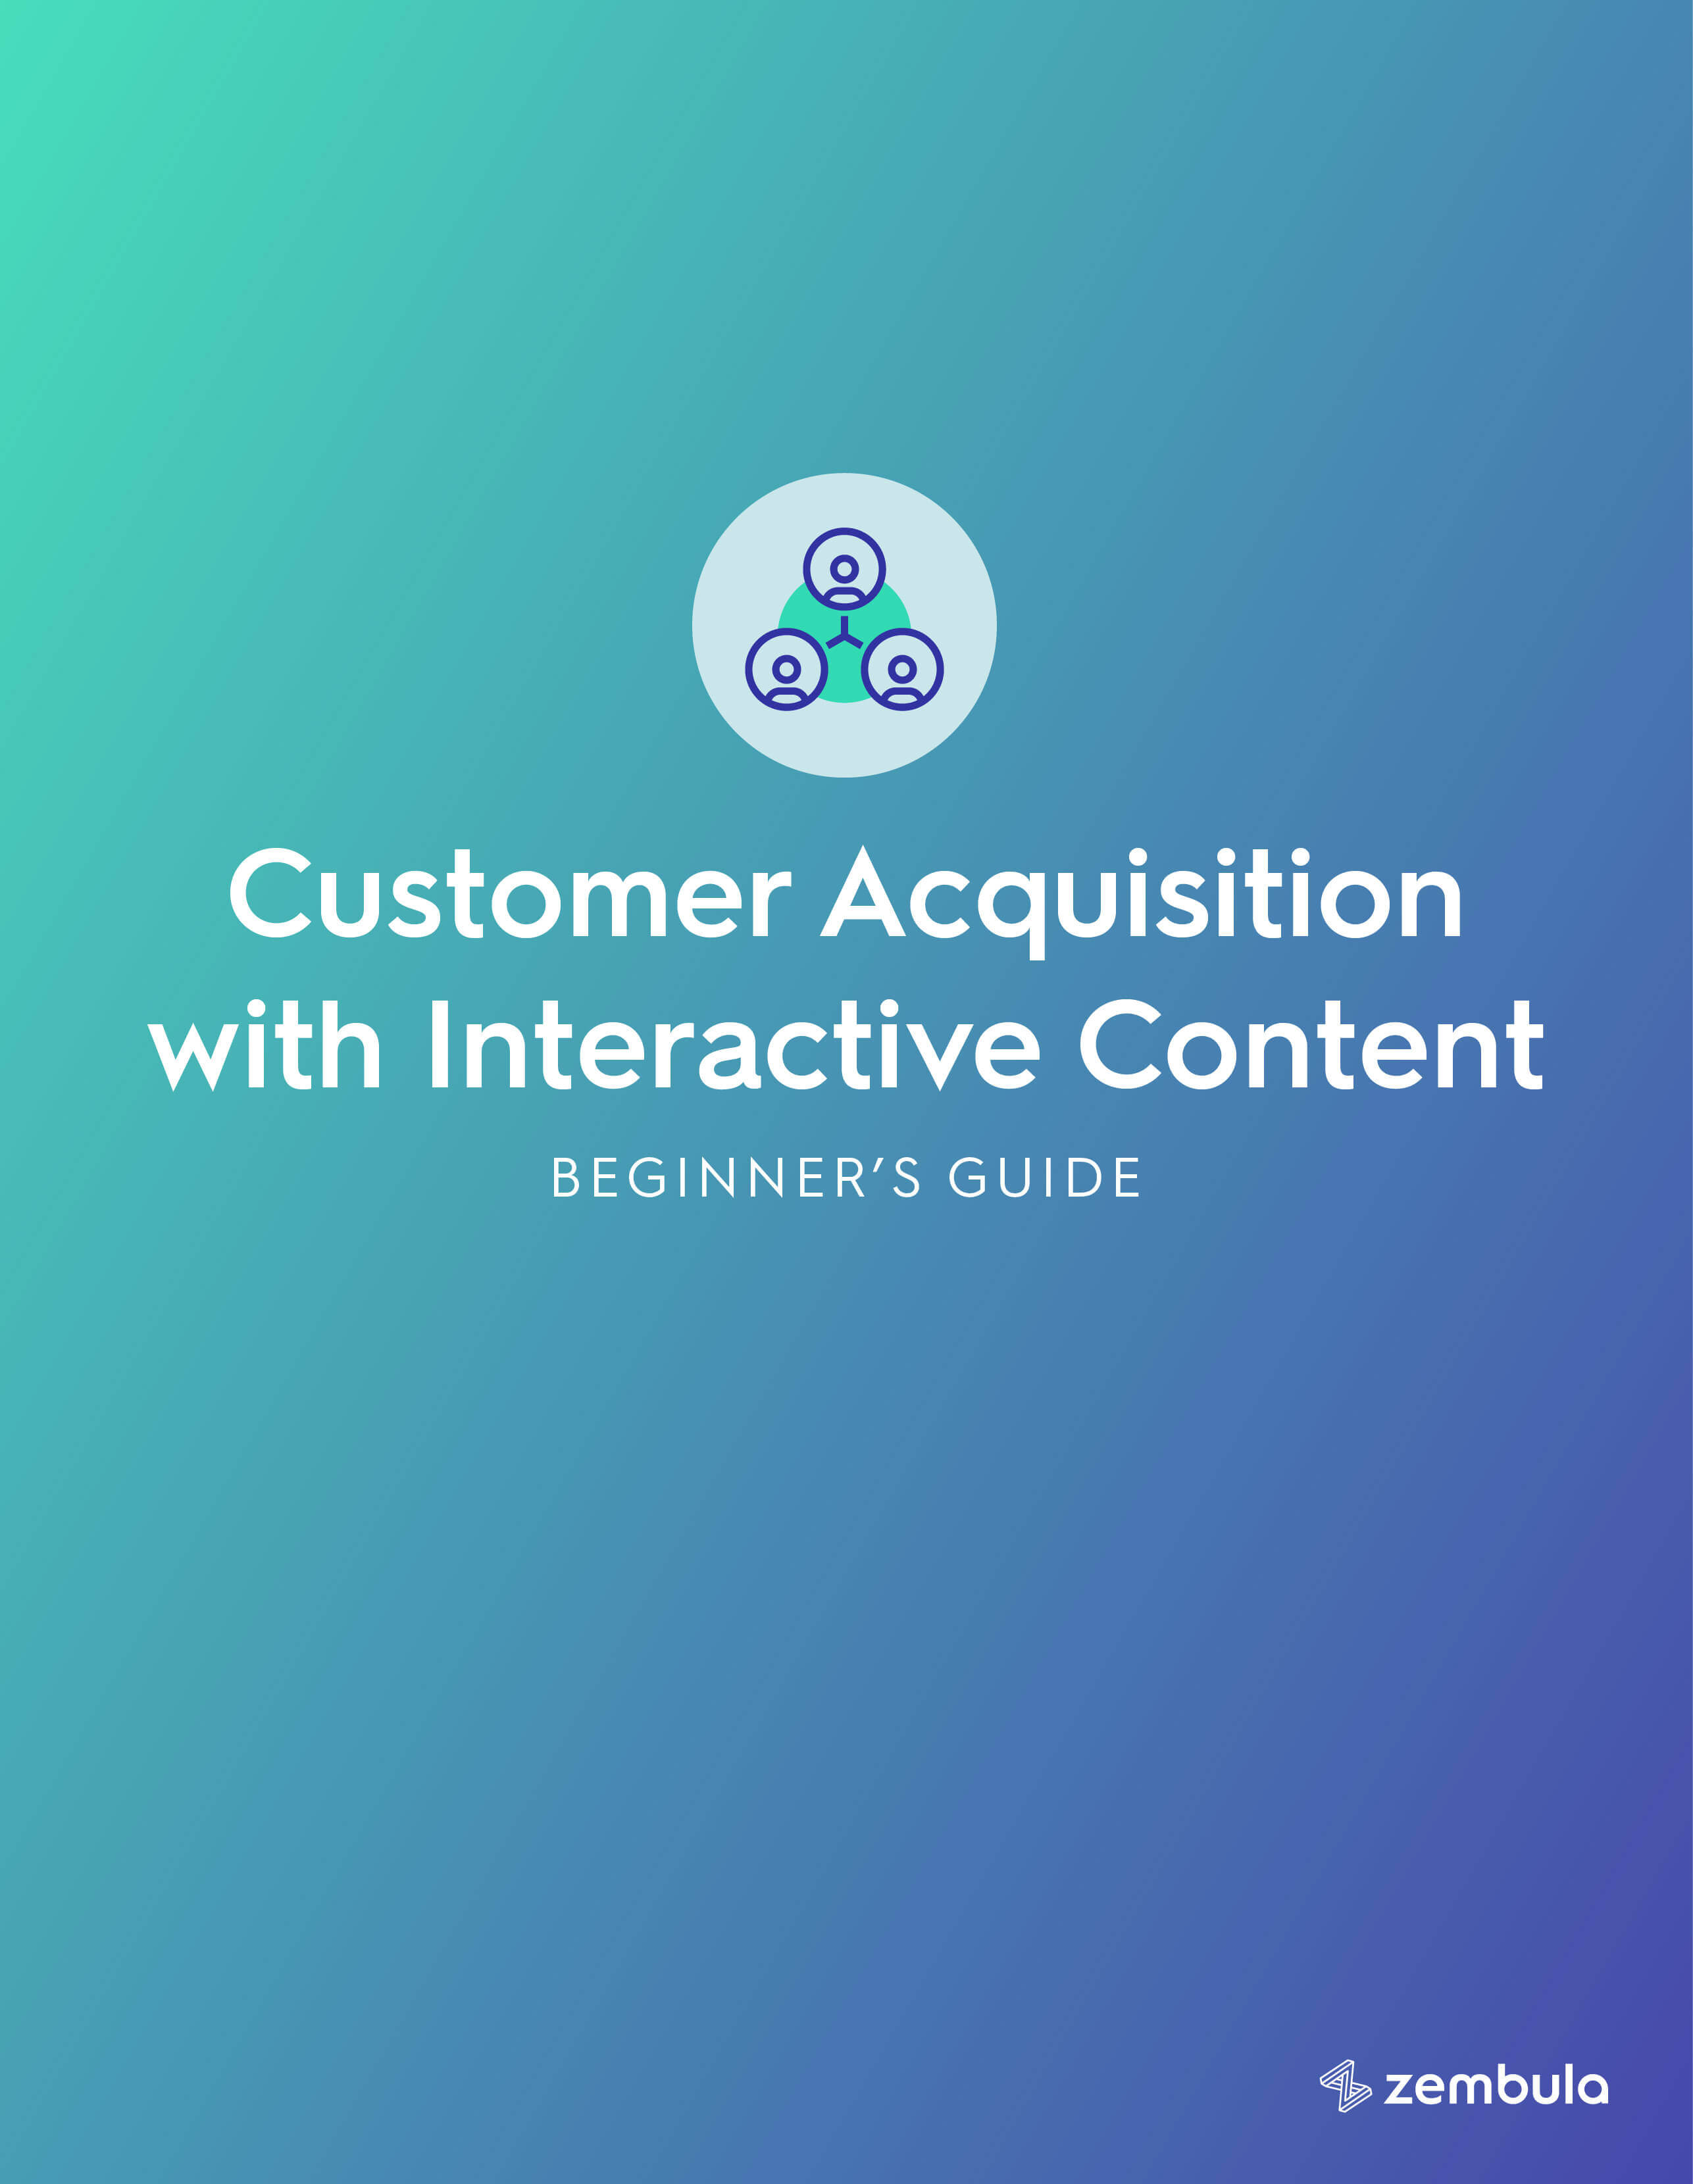 Guide to Customer Acquisition